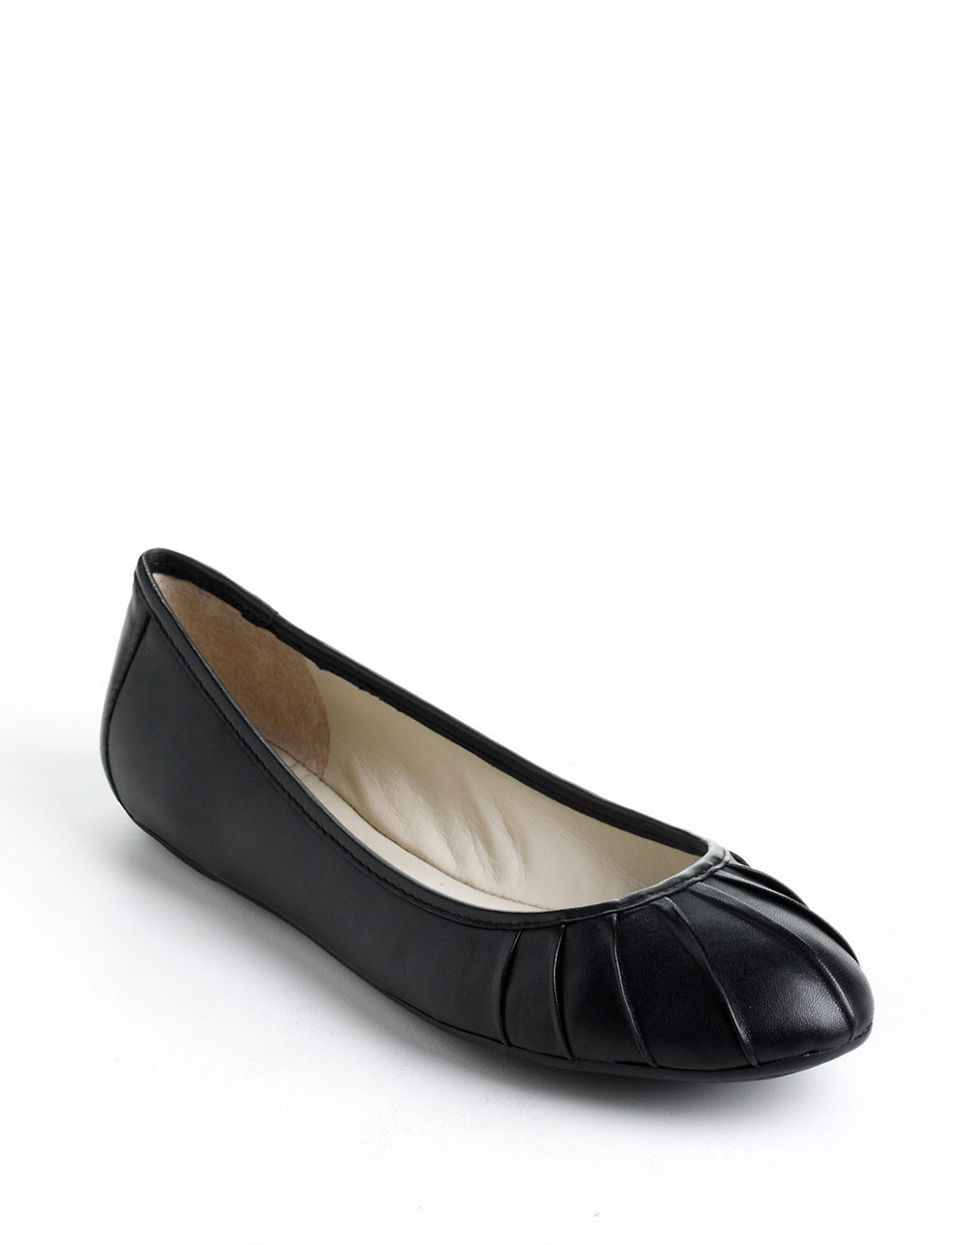 Nine west Blustery Pleated Leather Ballet Flats in Black | Lyst